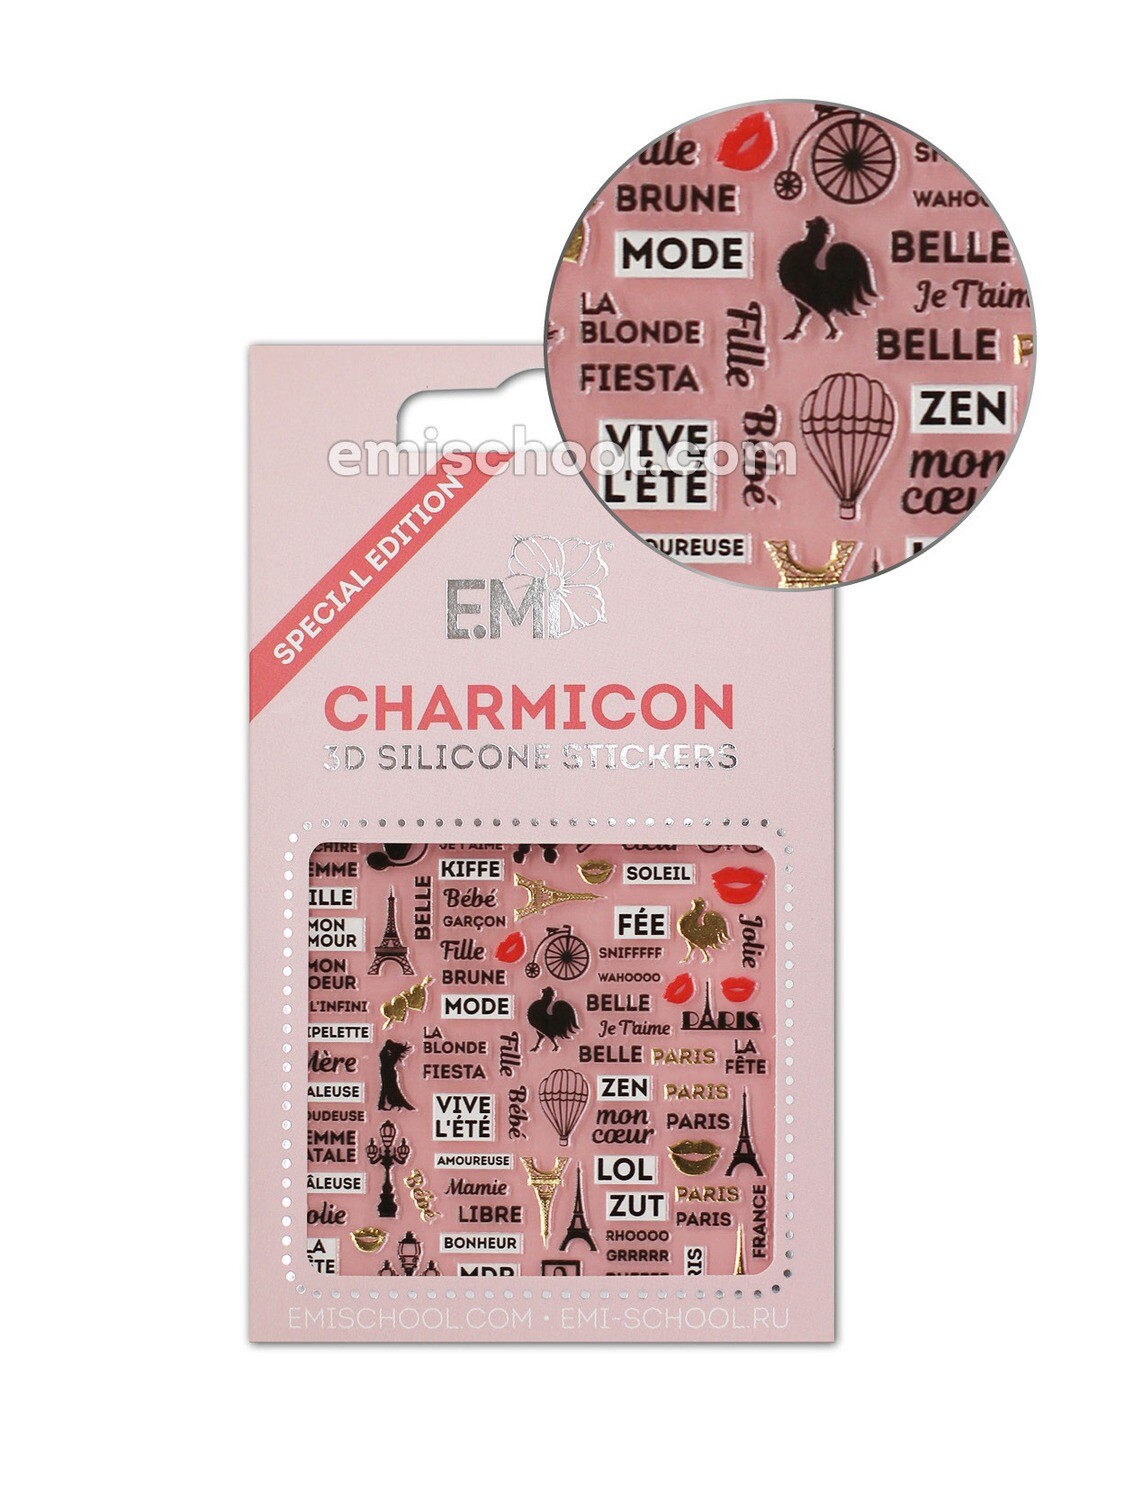 Charmicon 3D Silicone Stickers France 2